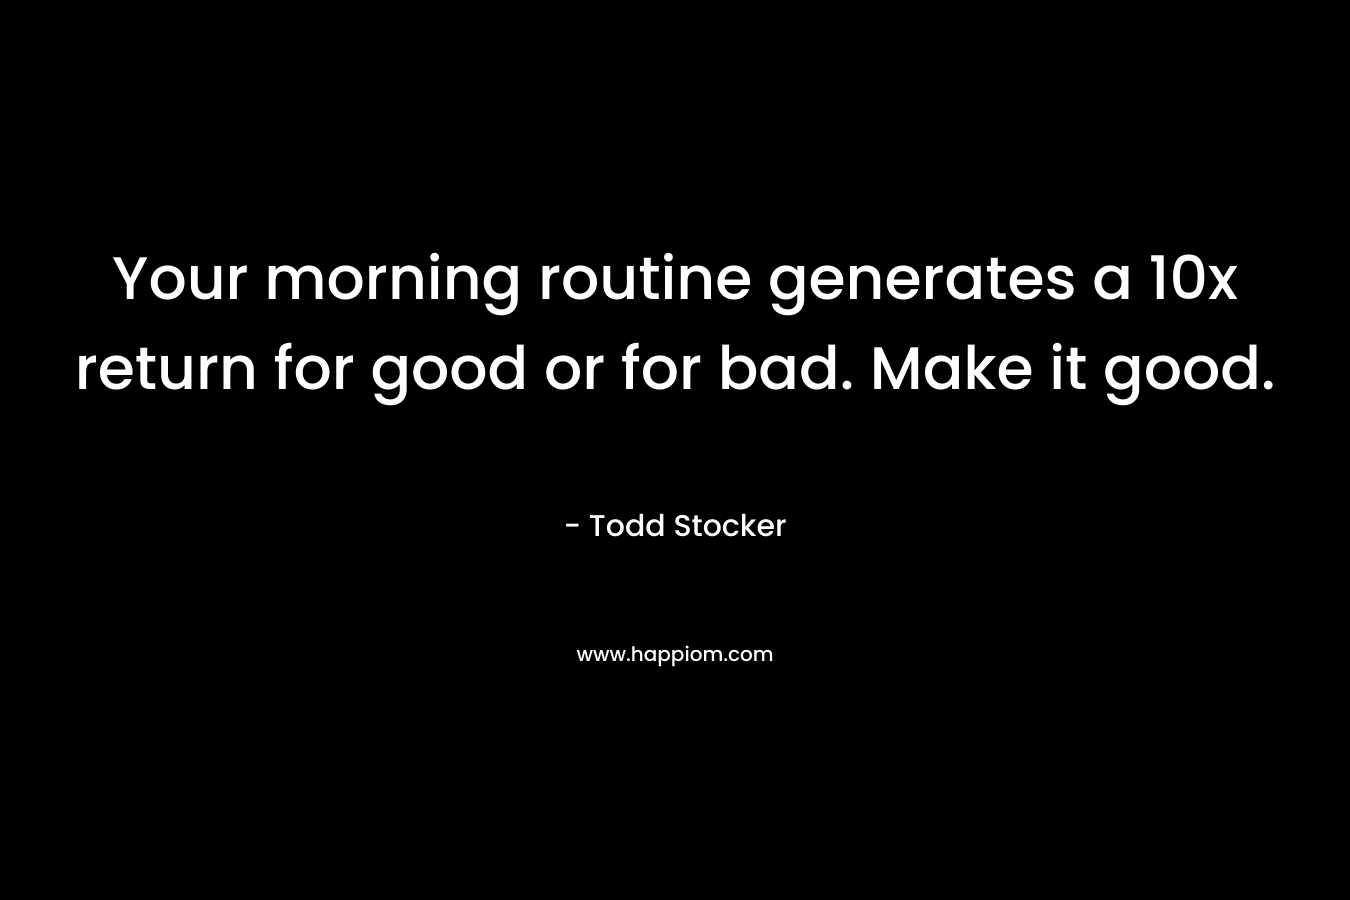 Your morning routine generates a 10x return for good or for bad. Make it good.